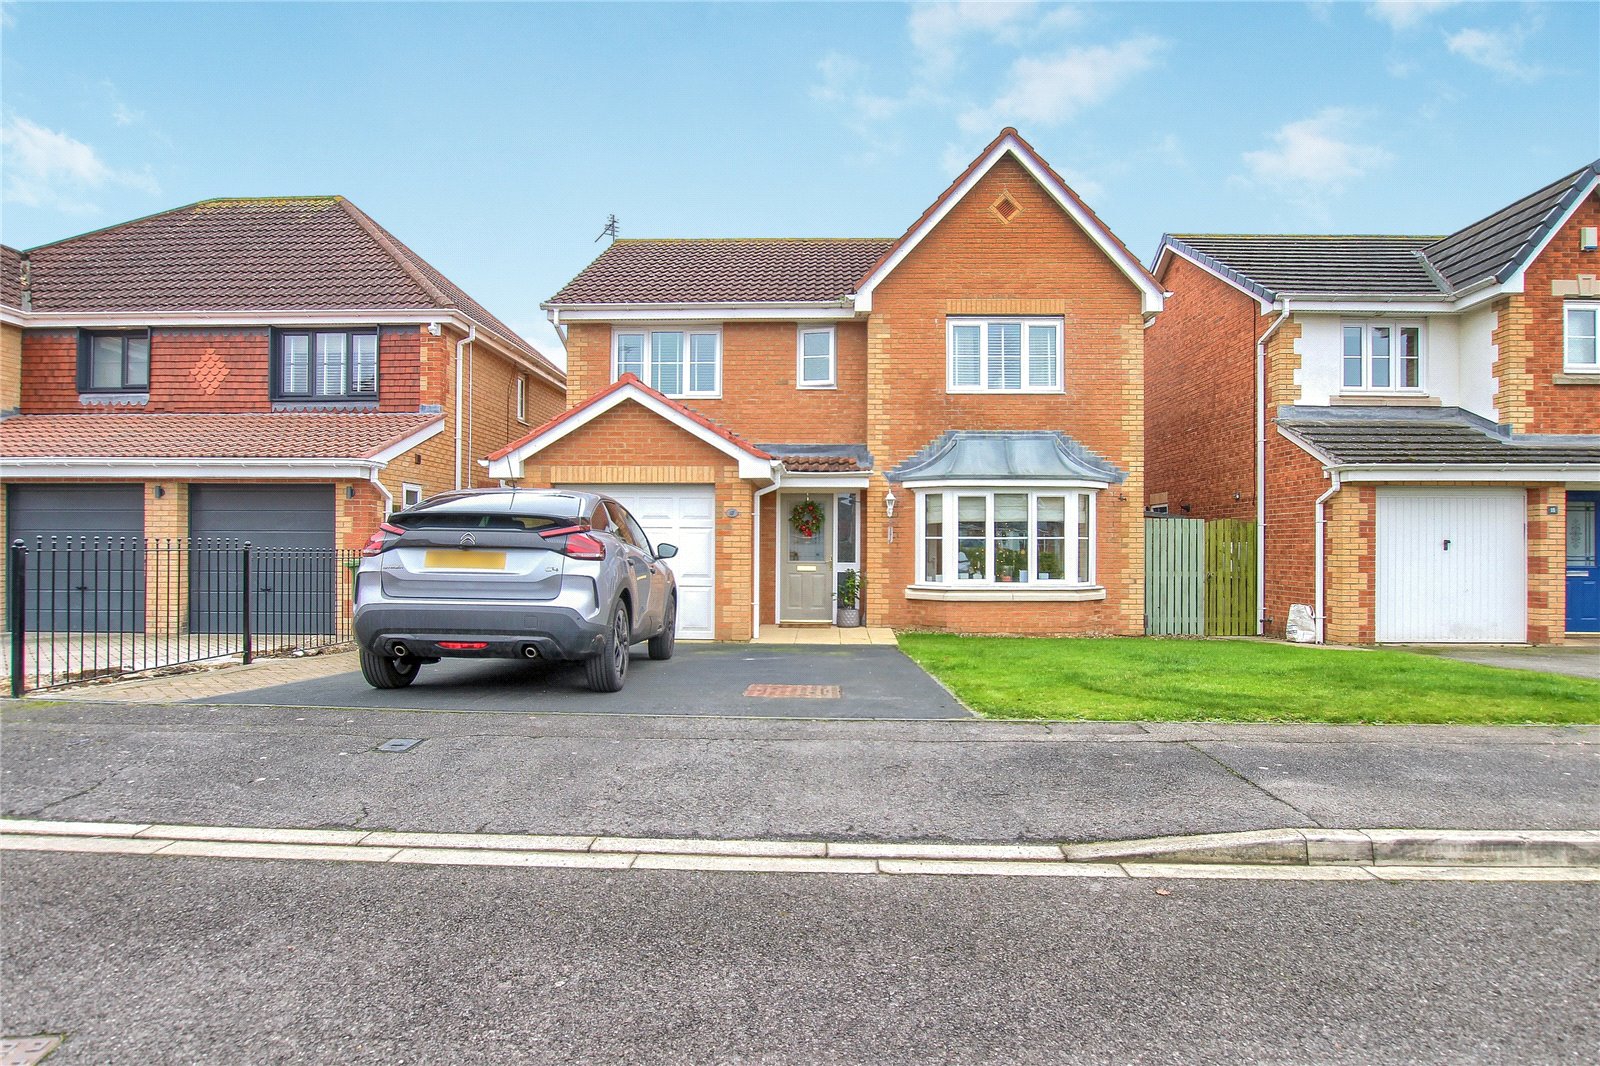 4 bed house for sale in Bowood Close, Ingleby Barwick  - Property Image 1